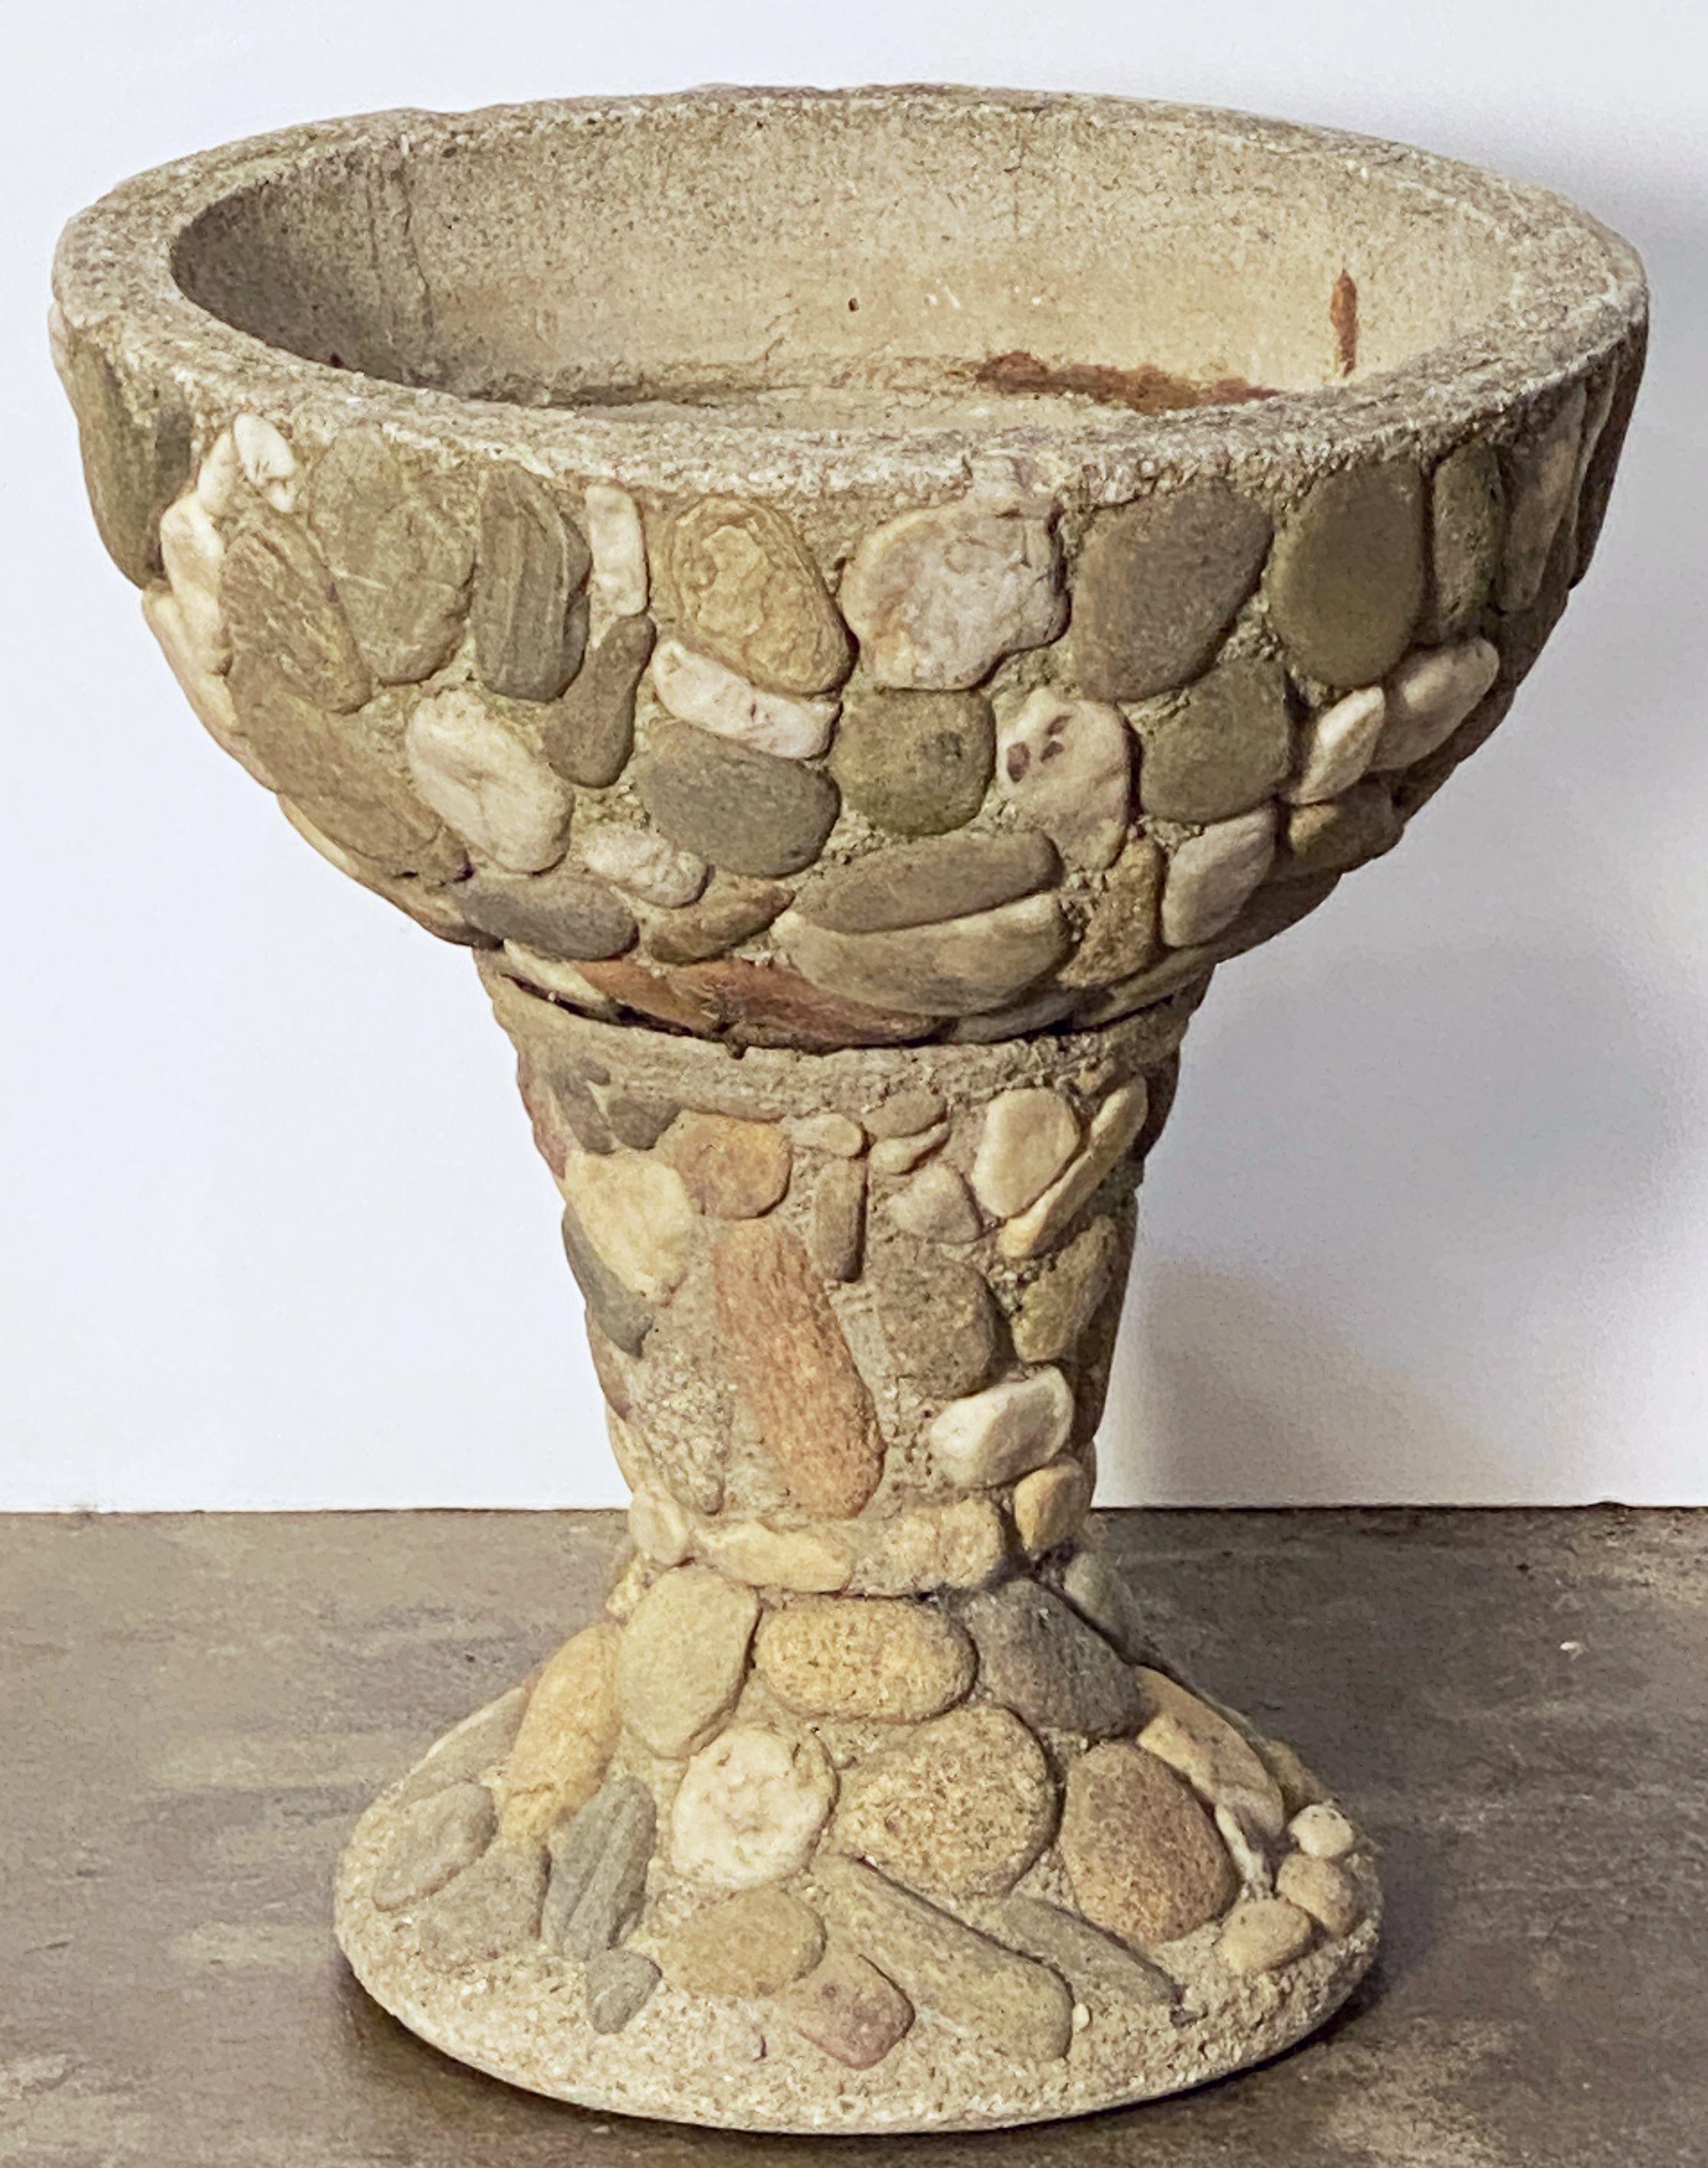 Raised Pebble-Pot Garden Planter or Urn with Embedded Stones from France In Good Condition For Sale In Austin, TX